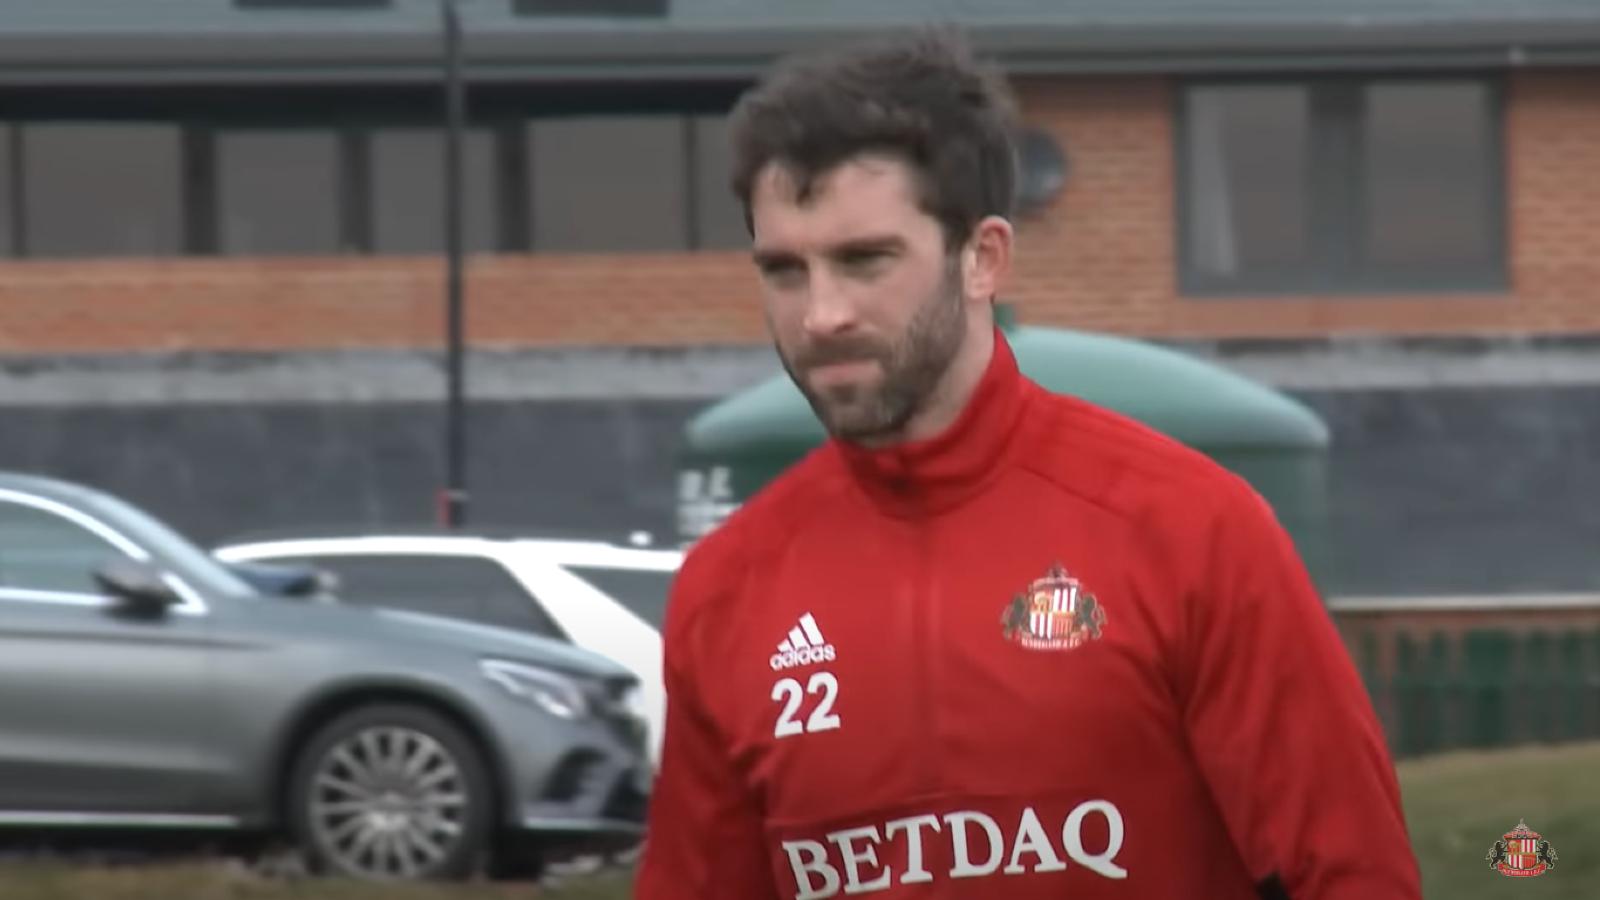 Grigg's spell at Sunderland was forgettable